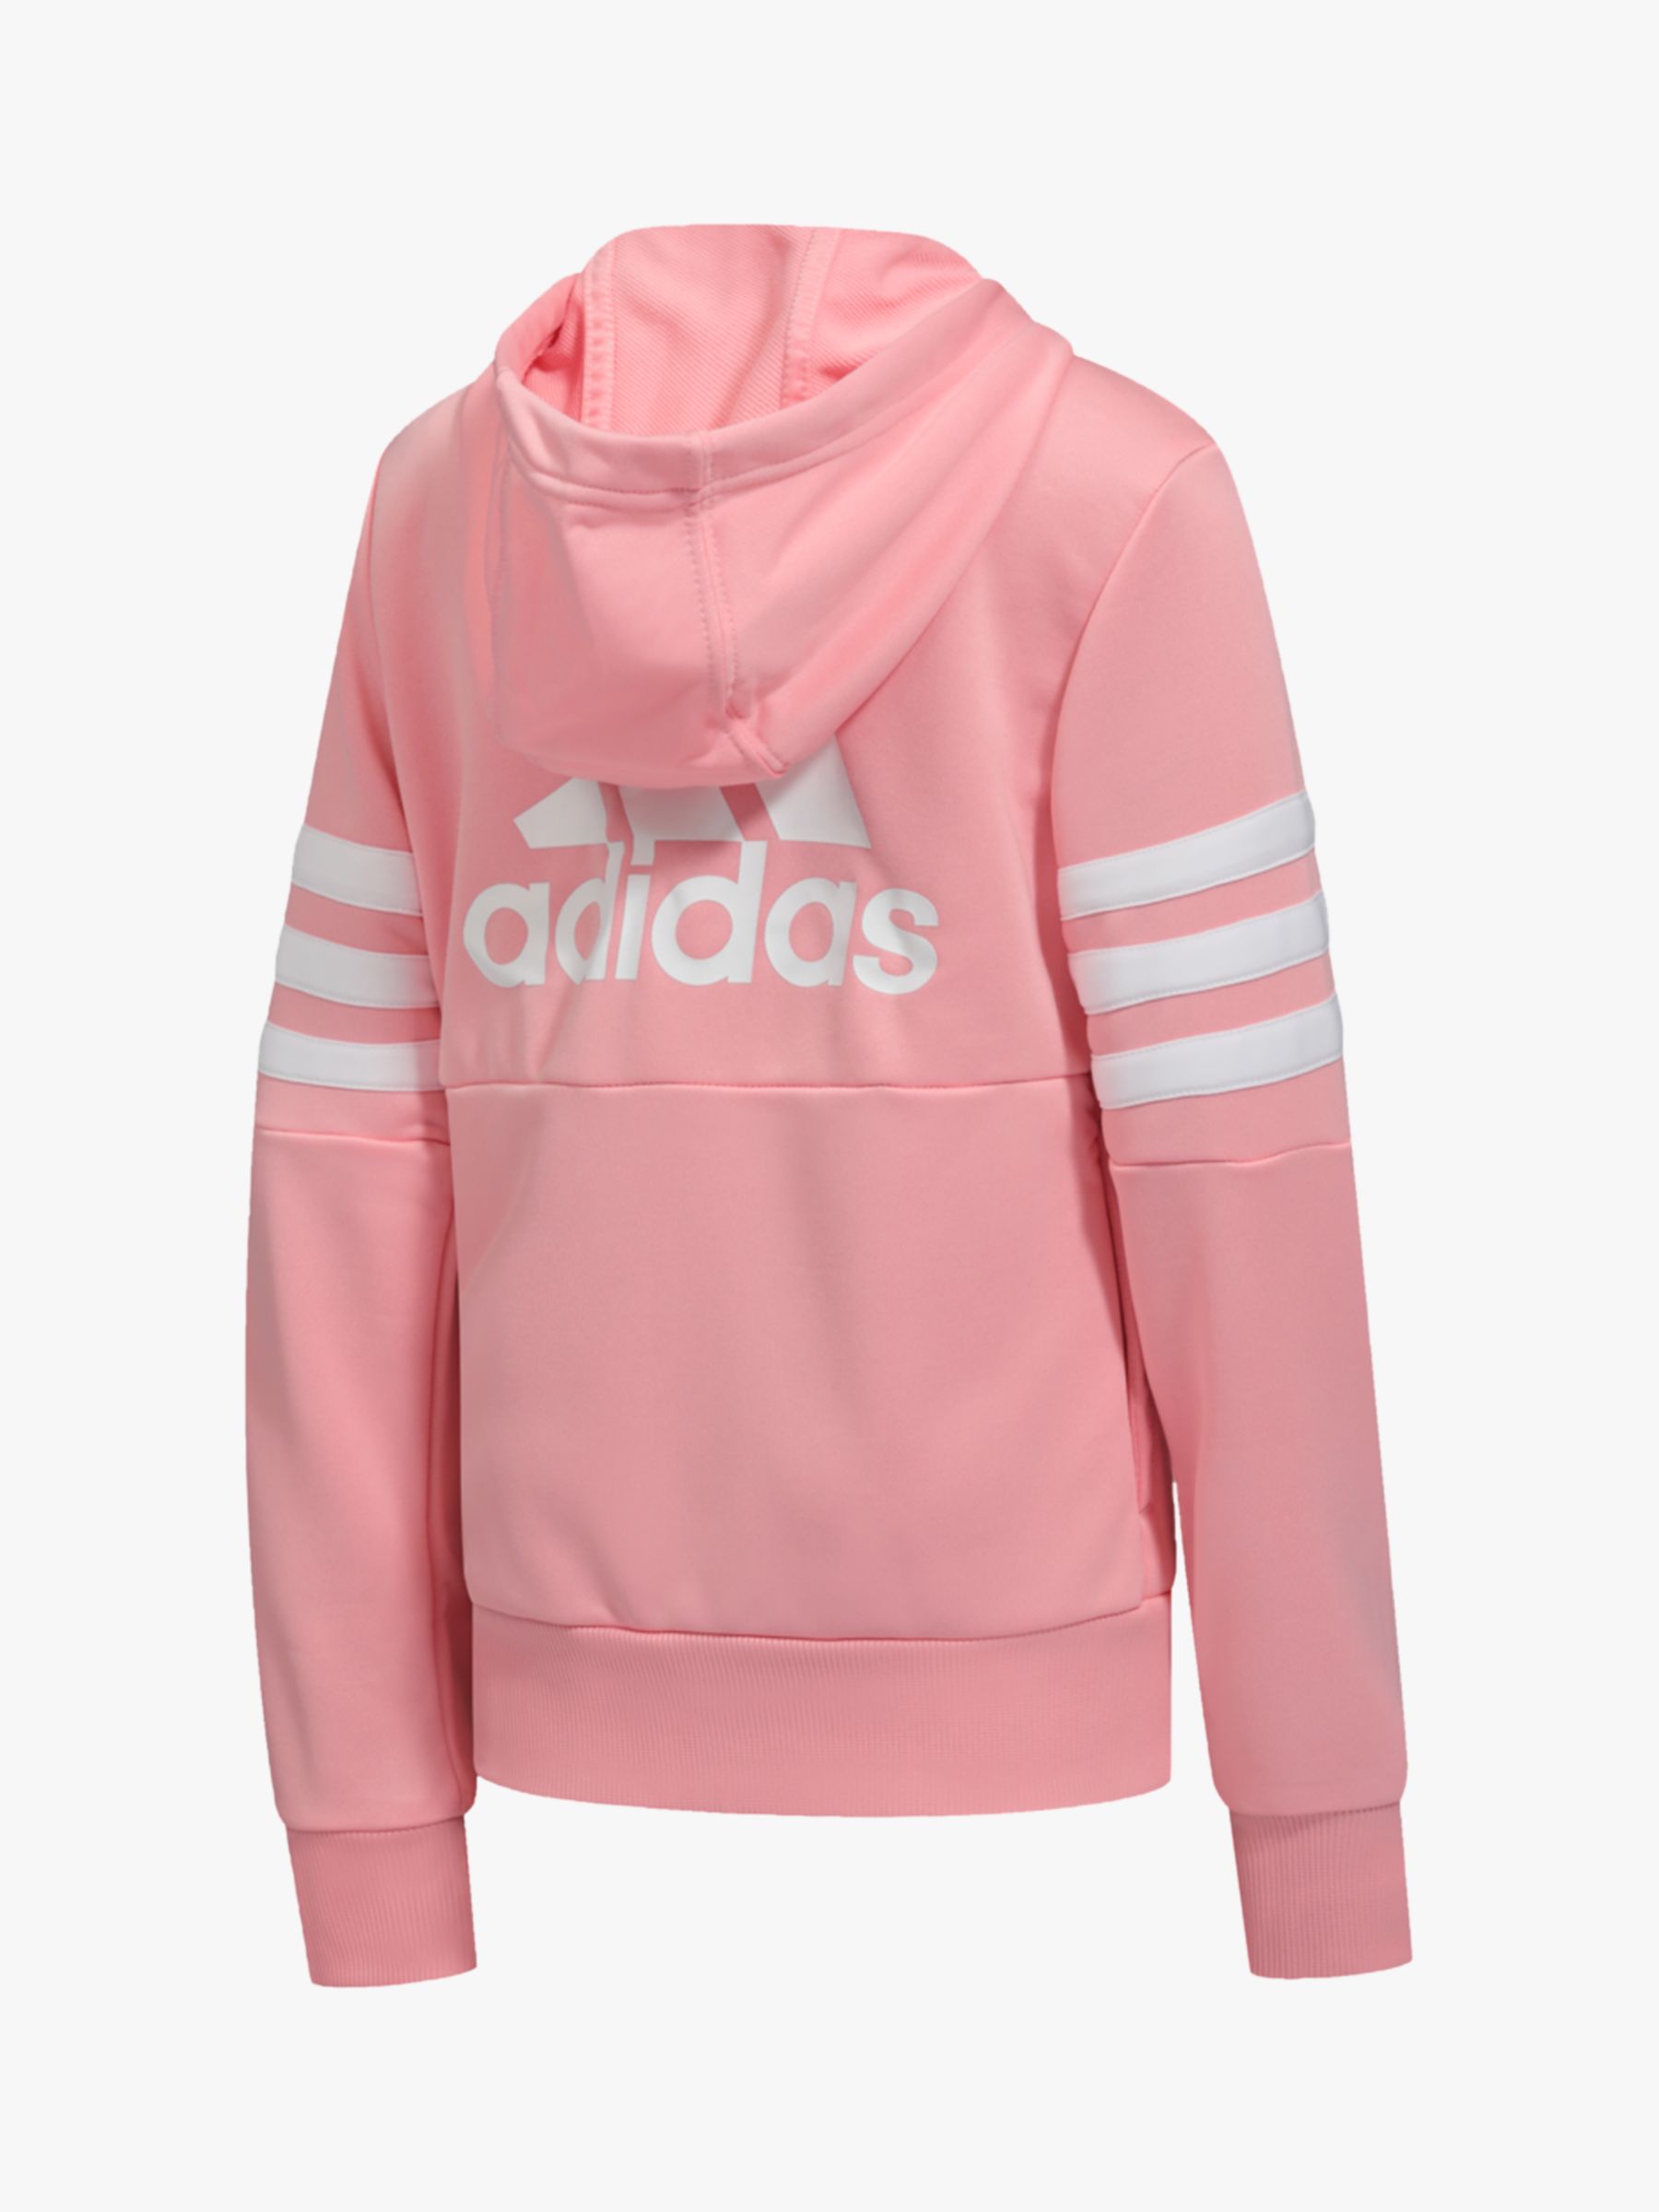 addidas track suit for girls